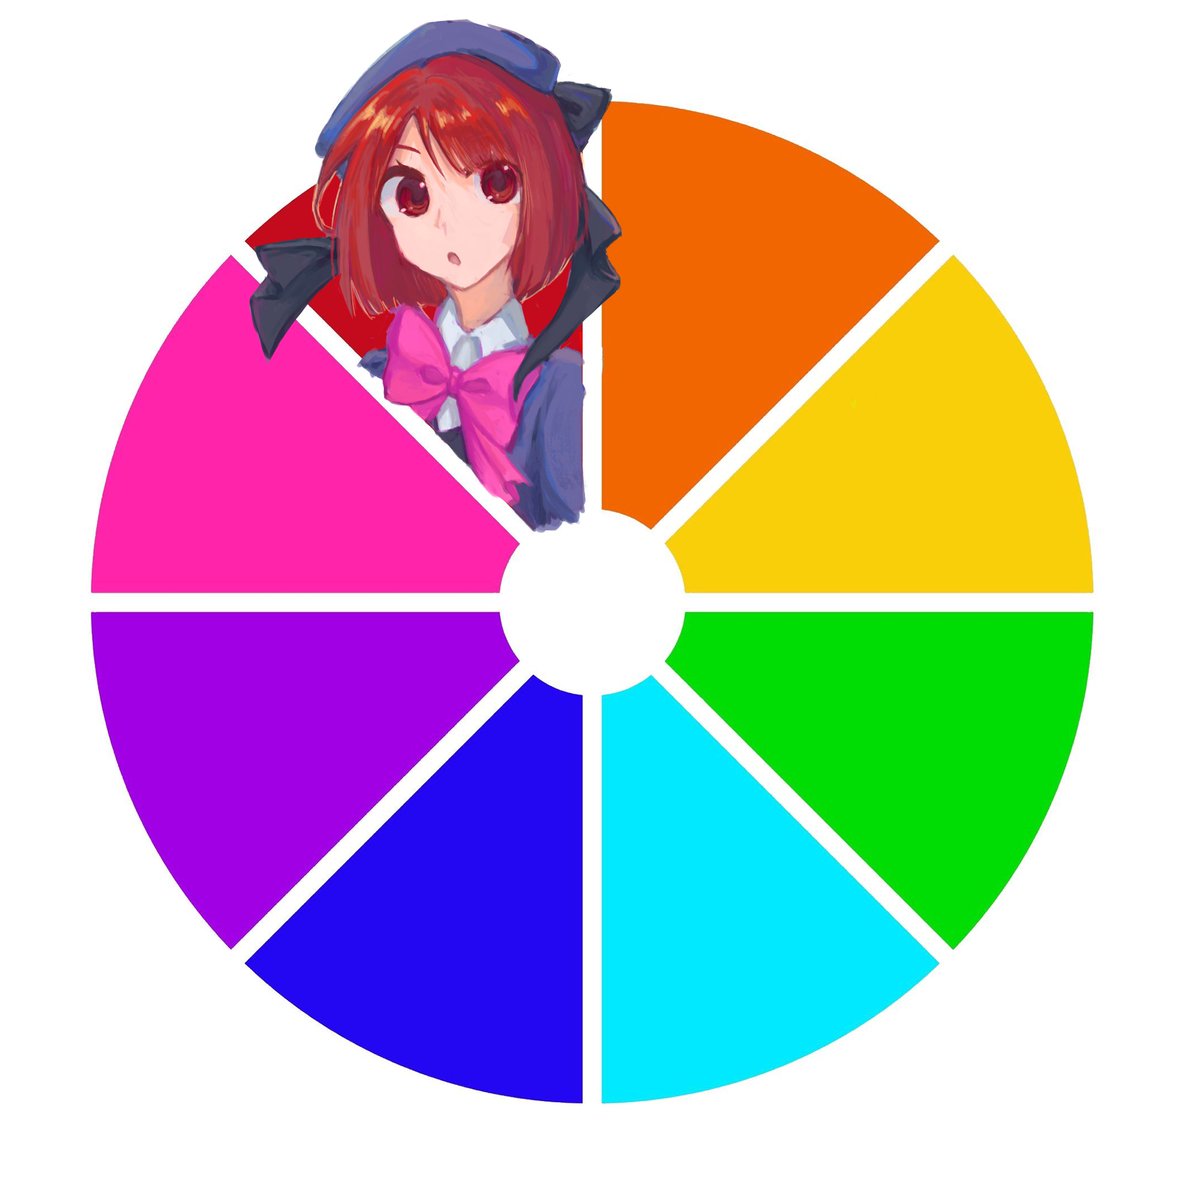 Doing the color wheel!
Red is for Arima Kana❤️